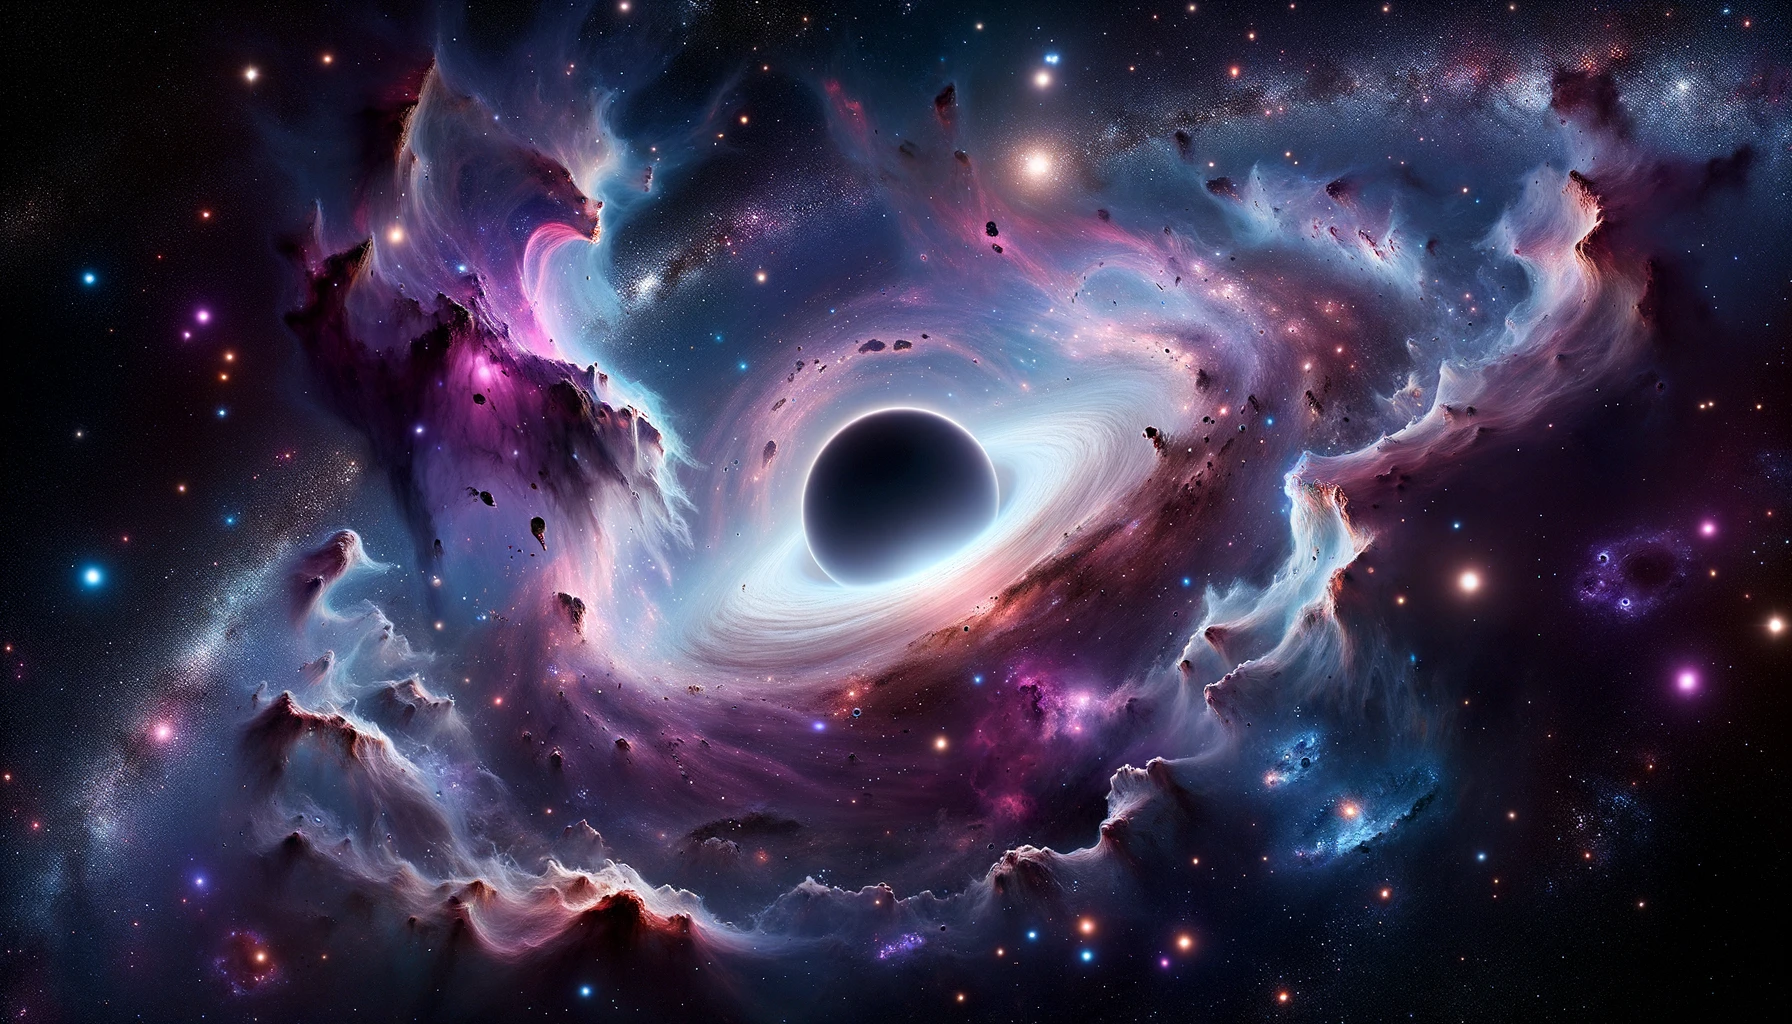 Digital render of a galaxy teeming with wonders. The backdrop is dotted with stars of varying sizes and brightness. Nebulae, looking like cosmic clouds, display a ballet of colors, predominantly in purple and blue hues. The center of this vast expanse is dominated by a massive black hole, its event horizon almost palpable. Adding to the scene's complexity, an alien planet with radiant rings orbits, its surface potentially harboring life.